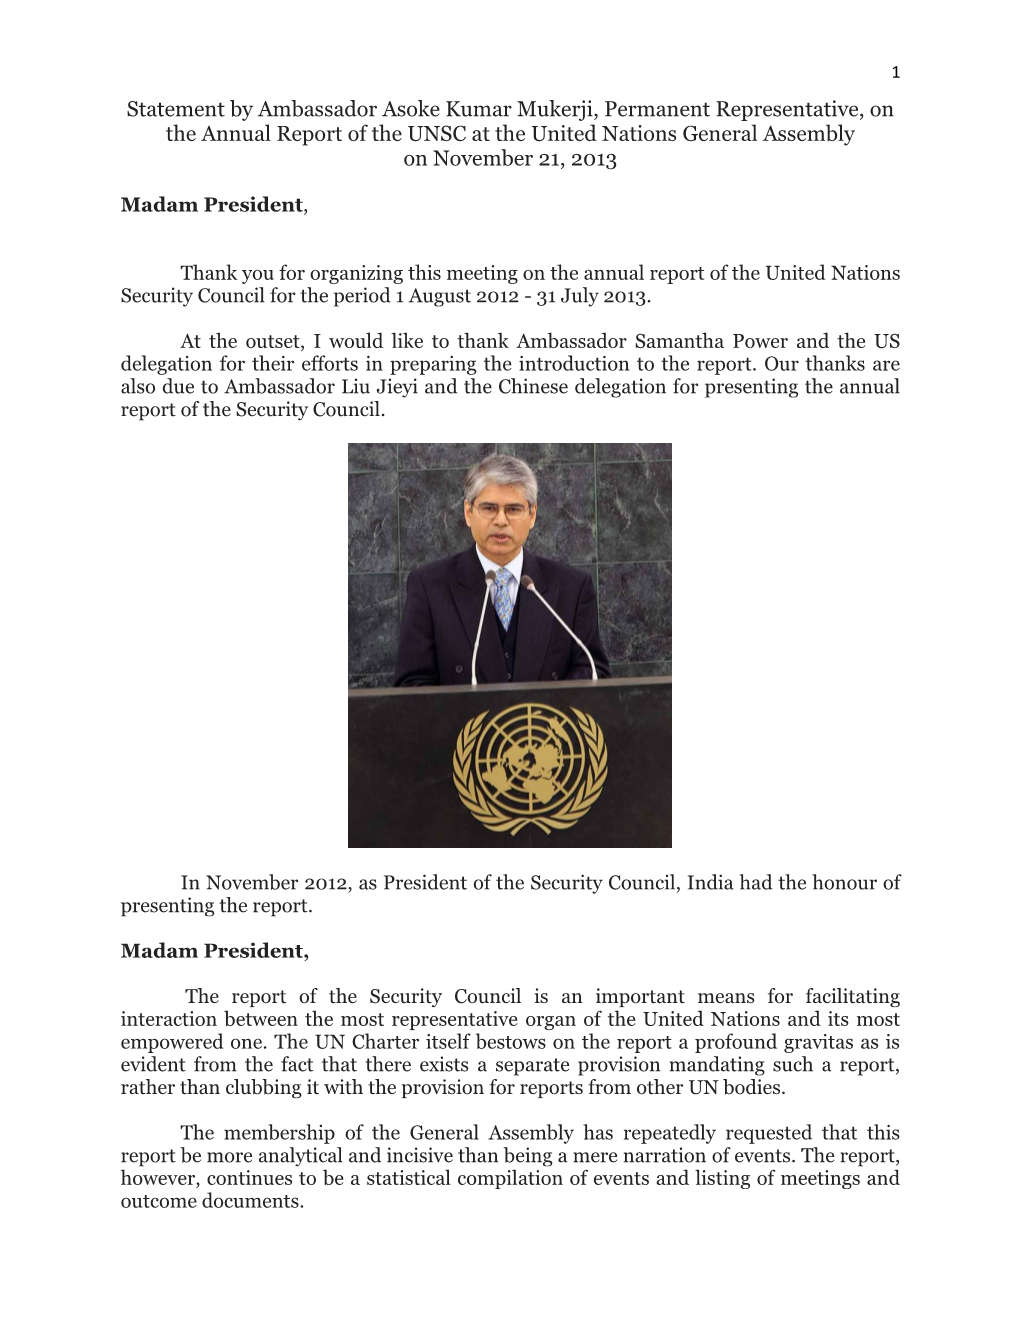 Statement by Ambassador Asoke Kumar Mukerji, Permanent Representative, on the Annual Report of the UNSC at the United Nations General Assembly on November 21, 2013